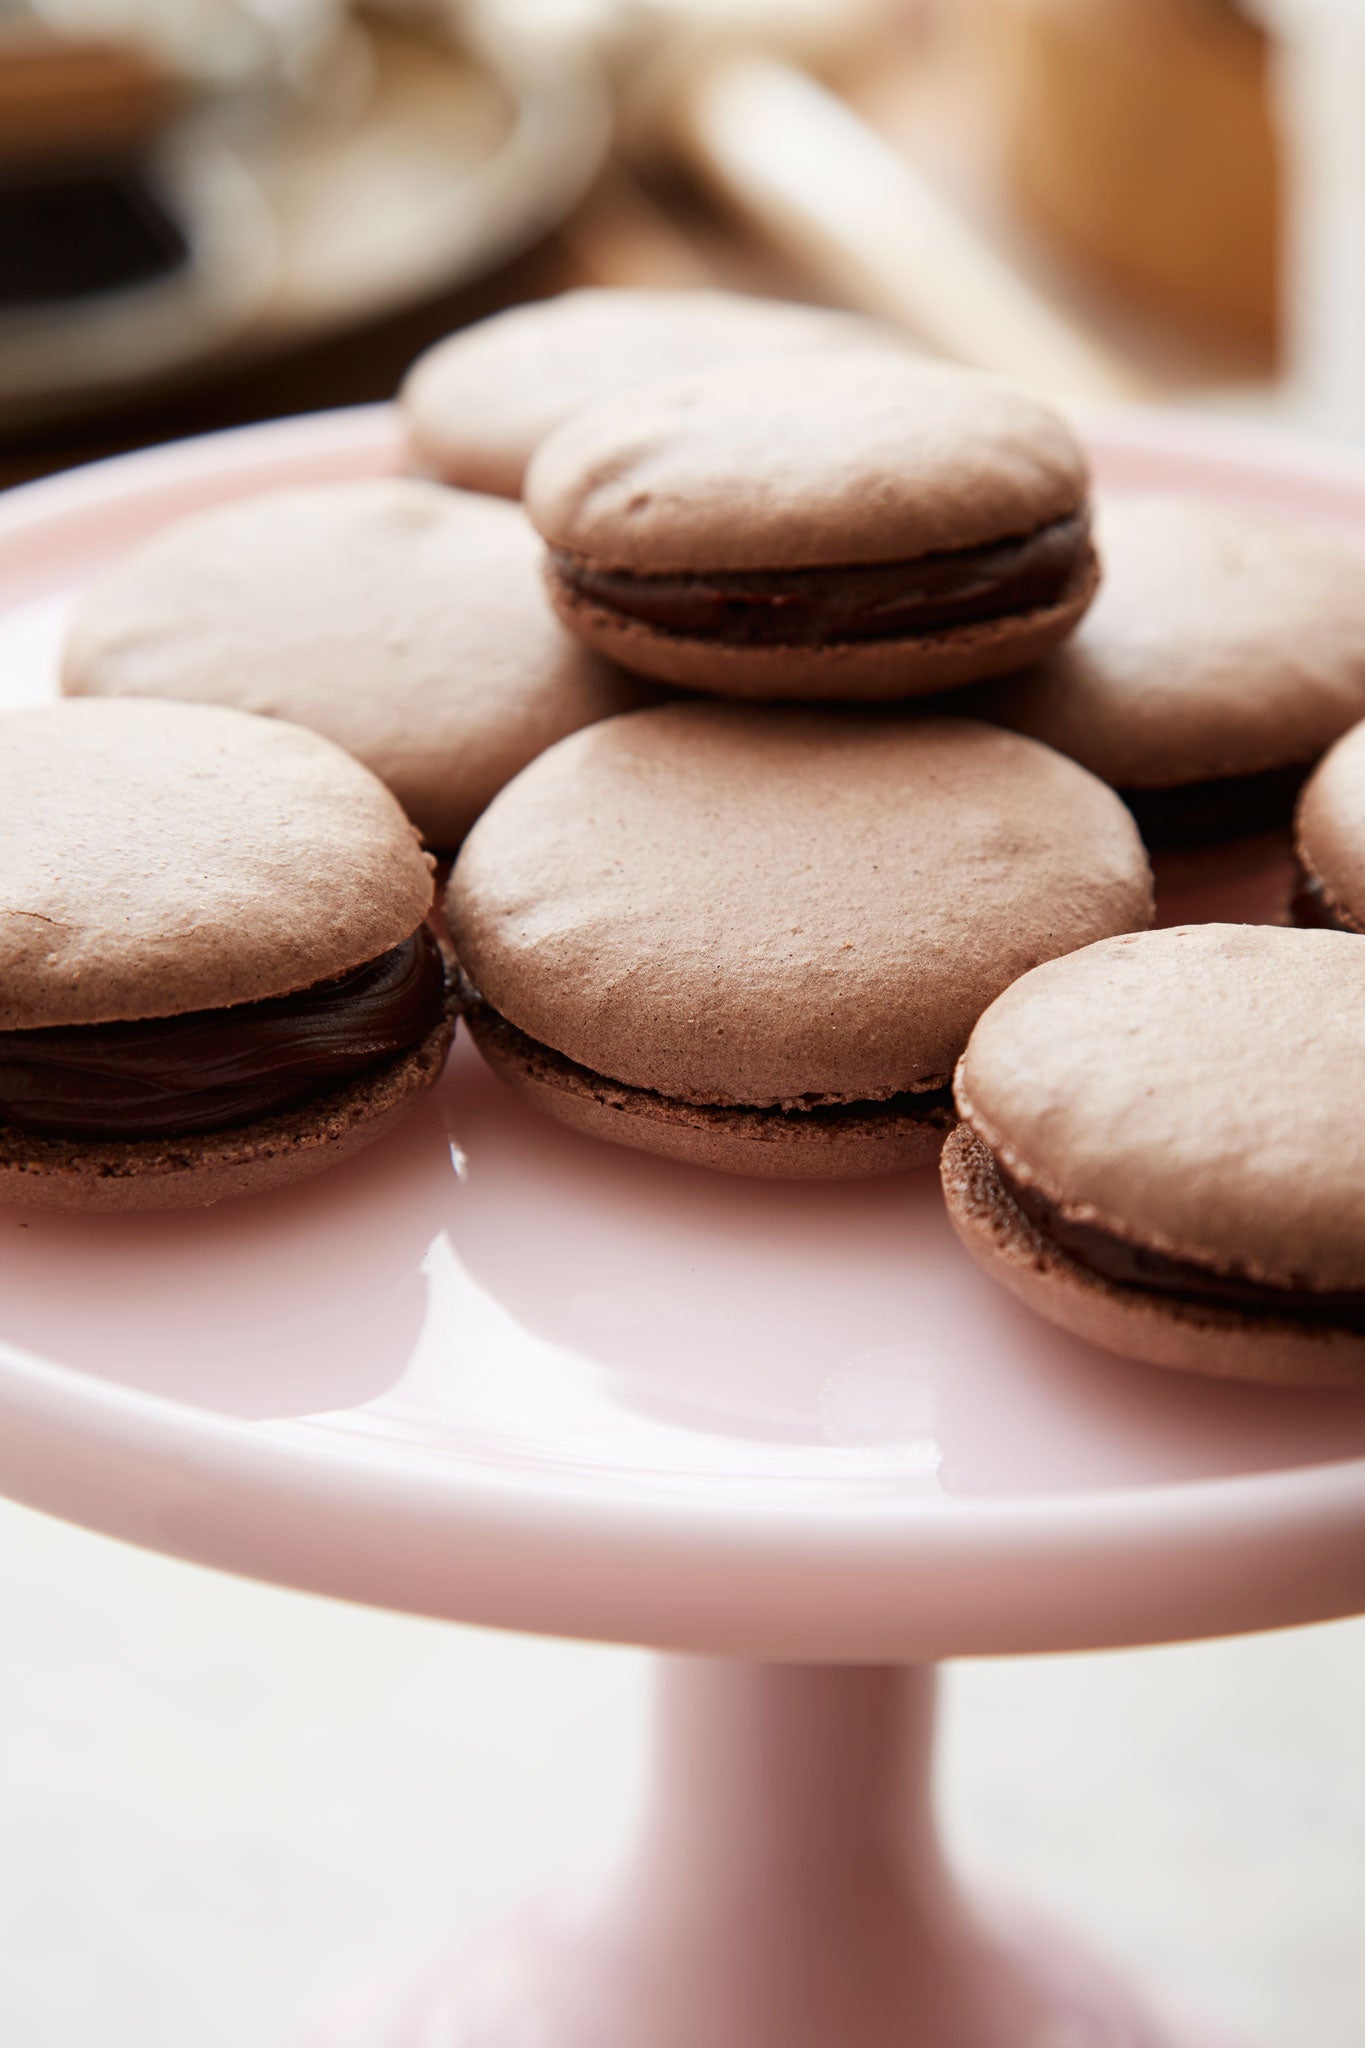 Melt in the mouth: Mark's take on the macaroon fad